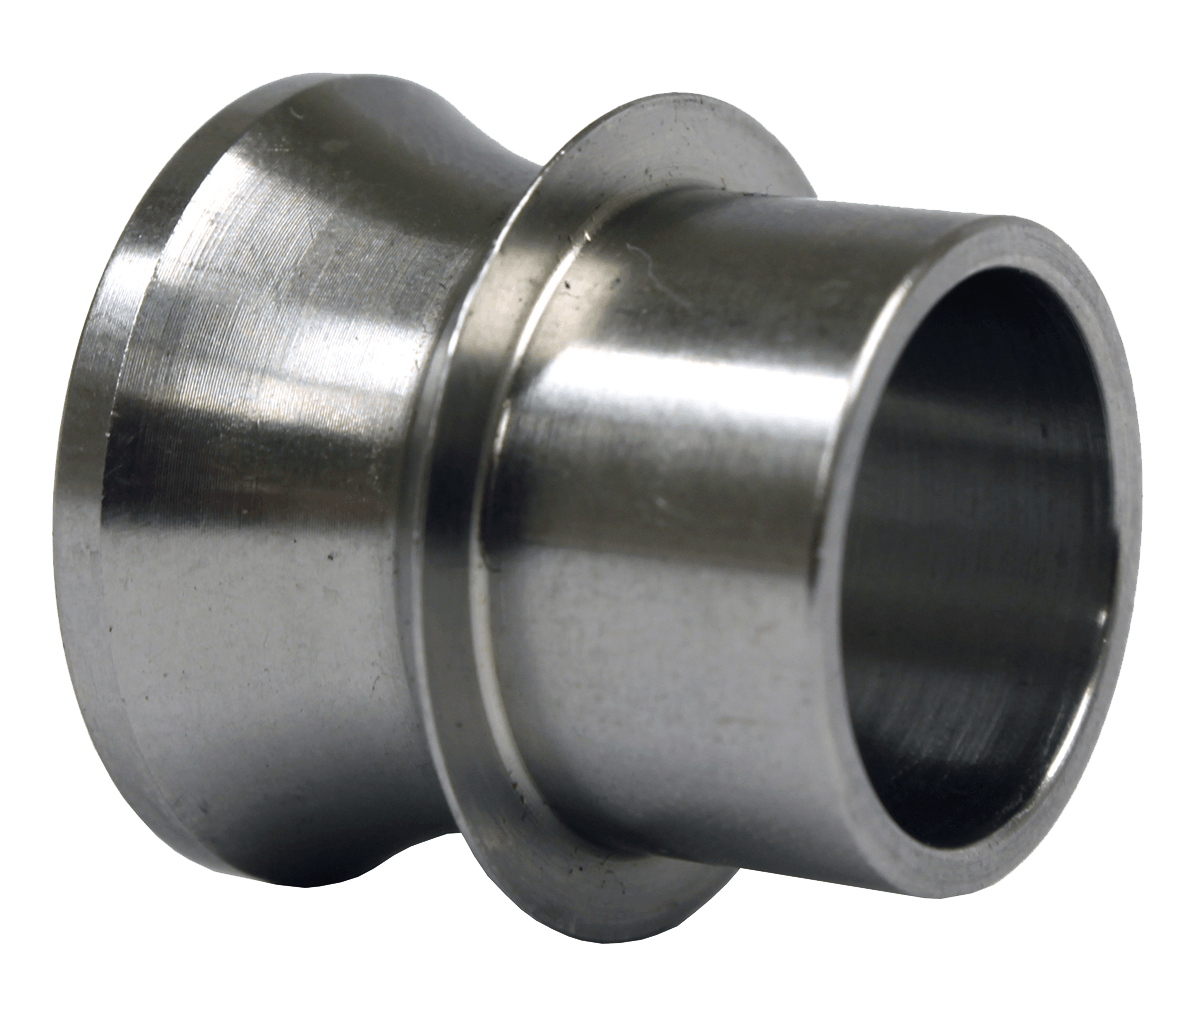 QA1 SN16-1216 High Misalignment Spacer, 1 inch Od Ss, .75 inch X 3 inch Total Width